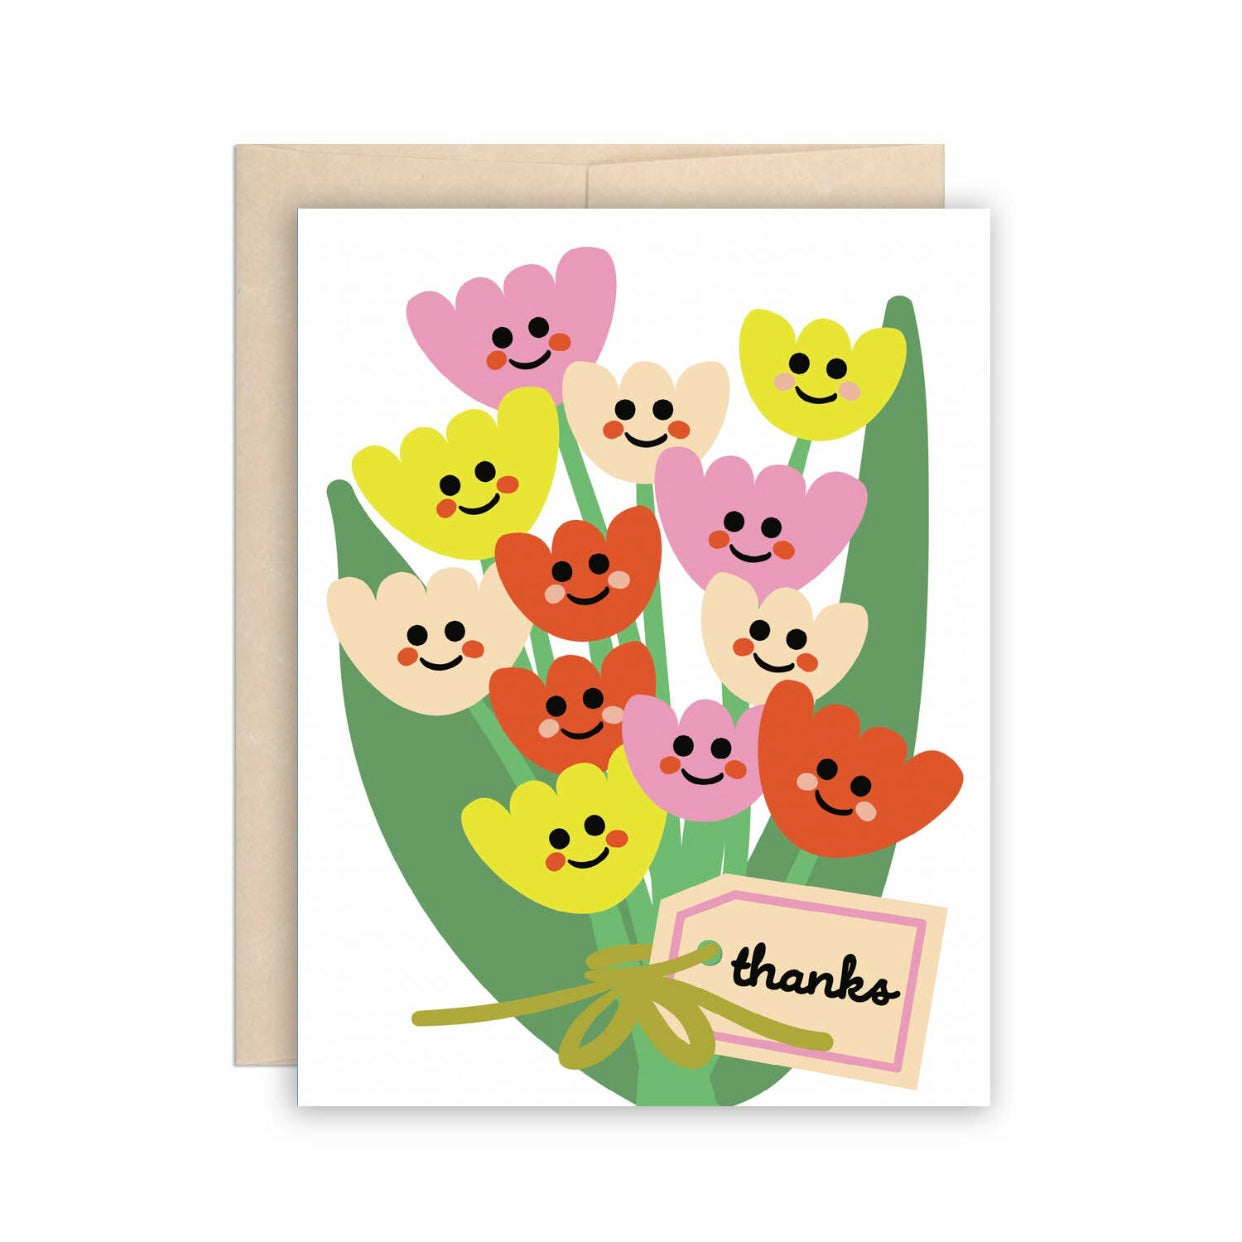 Thank you flowers Greeting Card